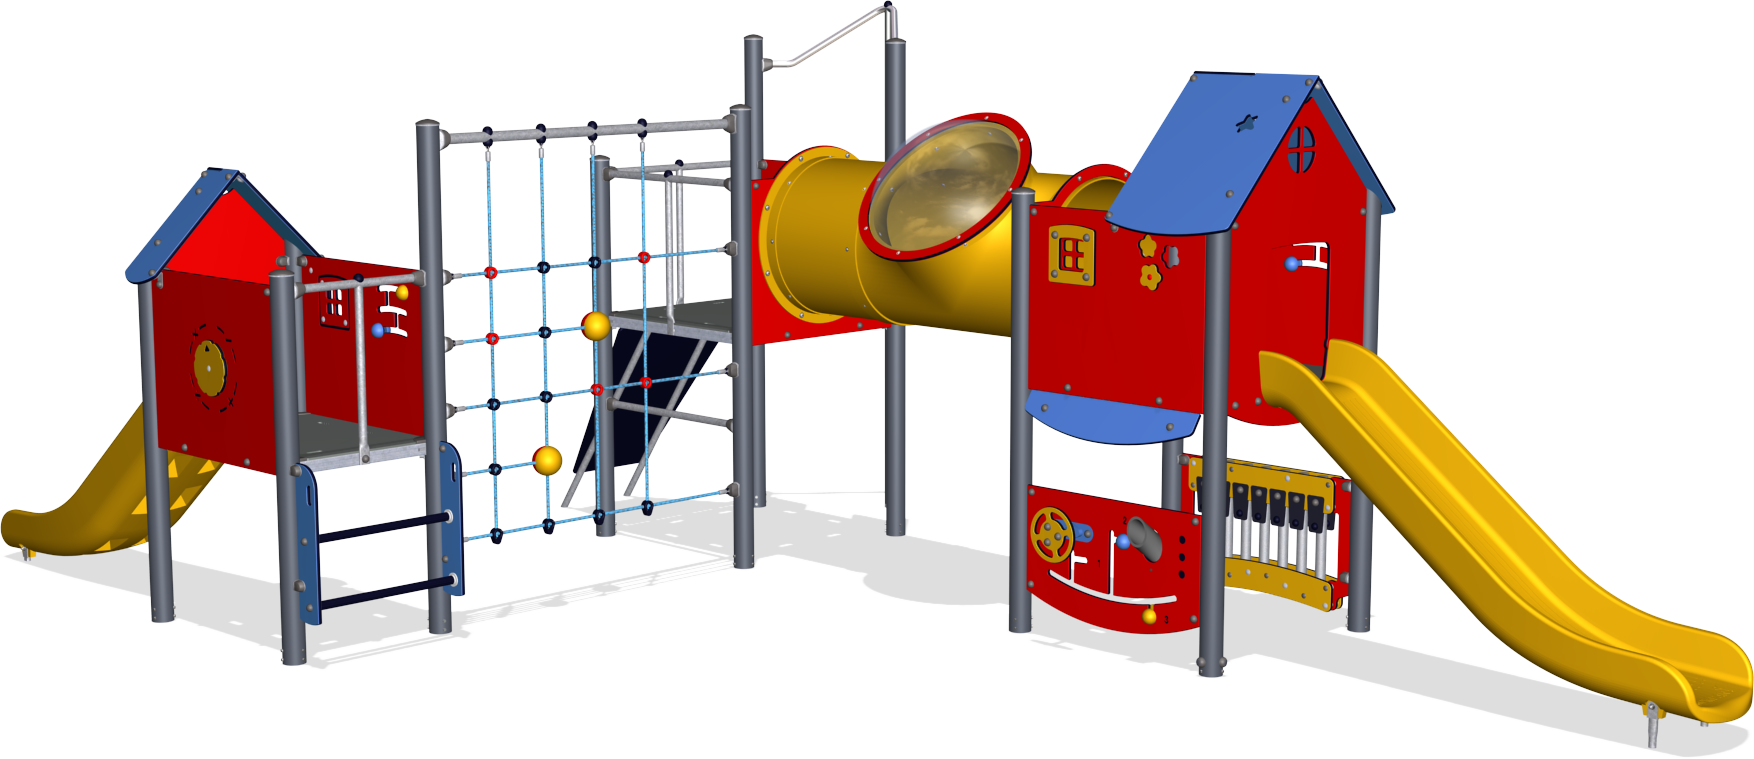  collection of png. Clipart park playground equipment